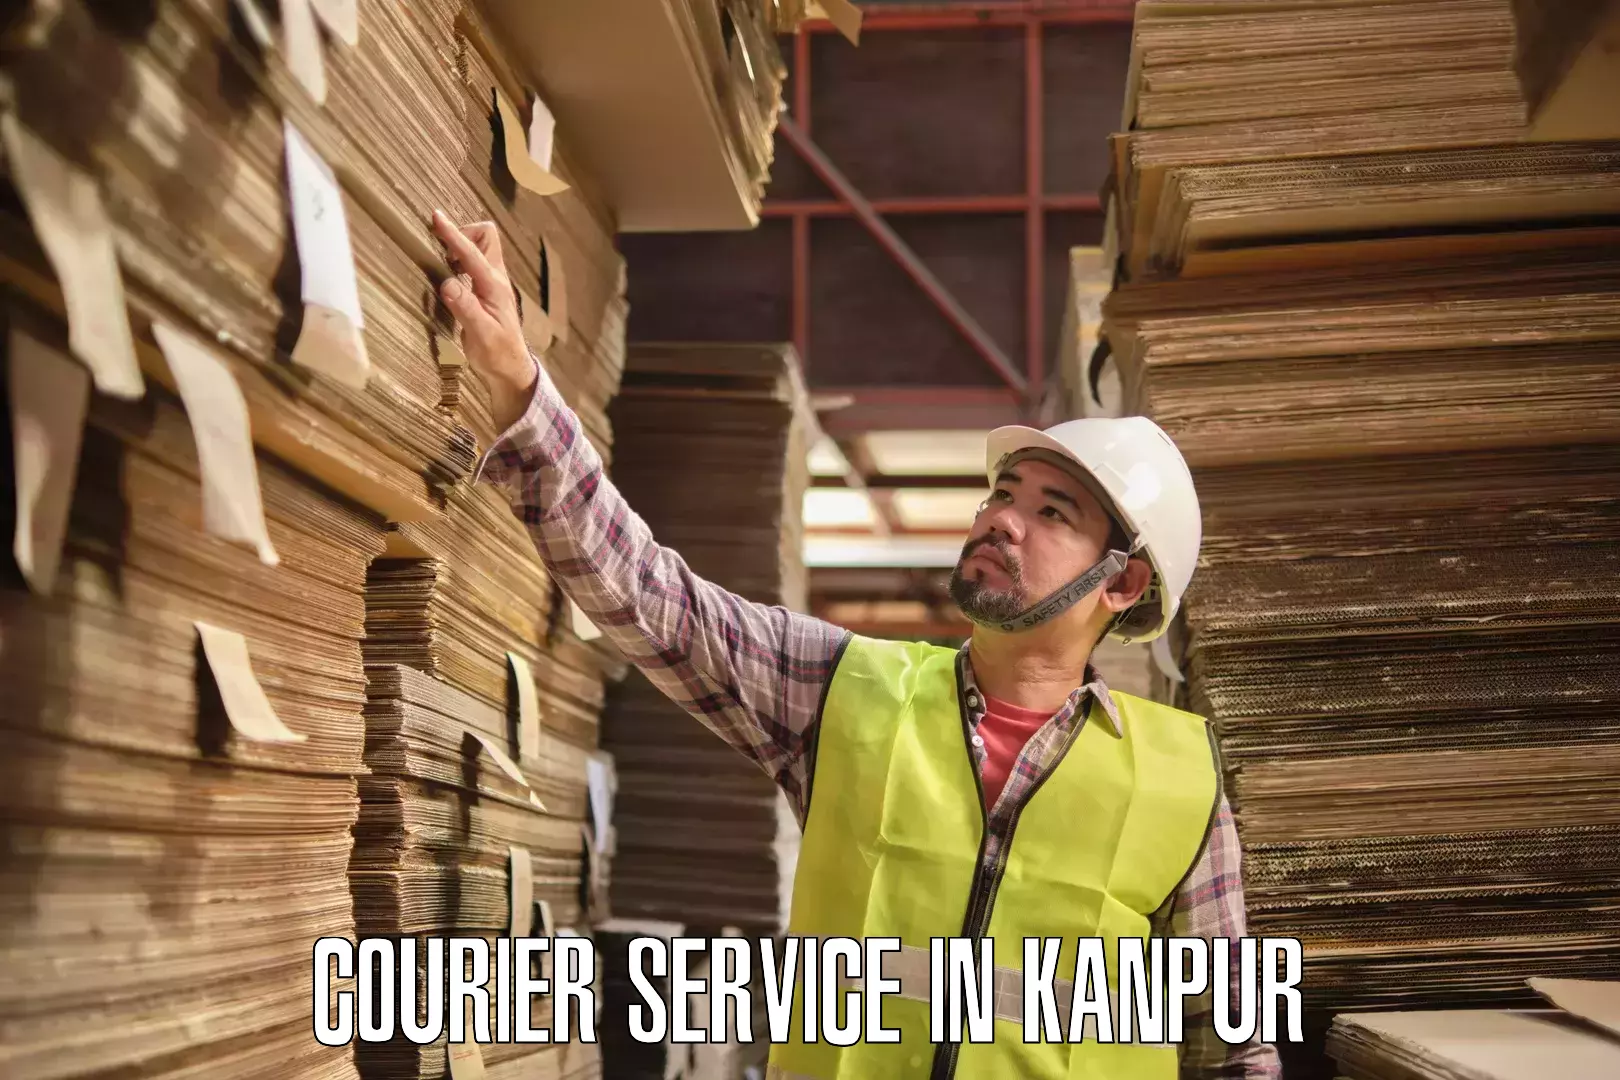 Customer-focused courier in Kanpur